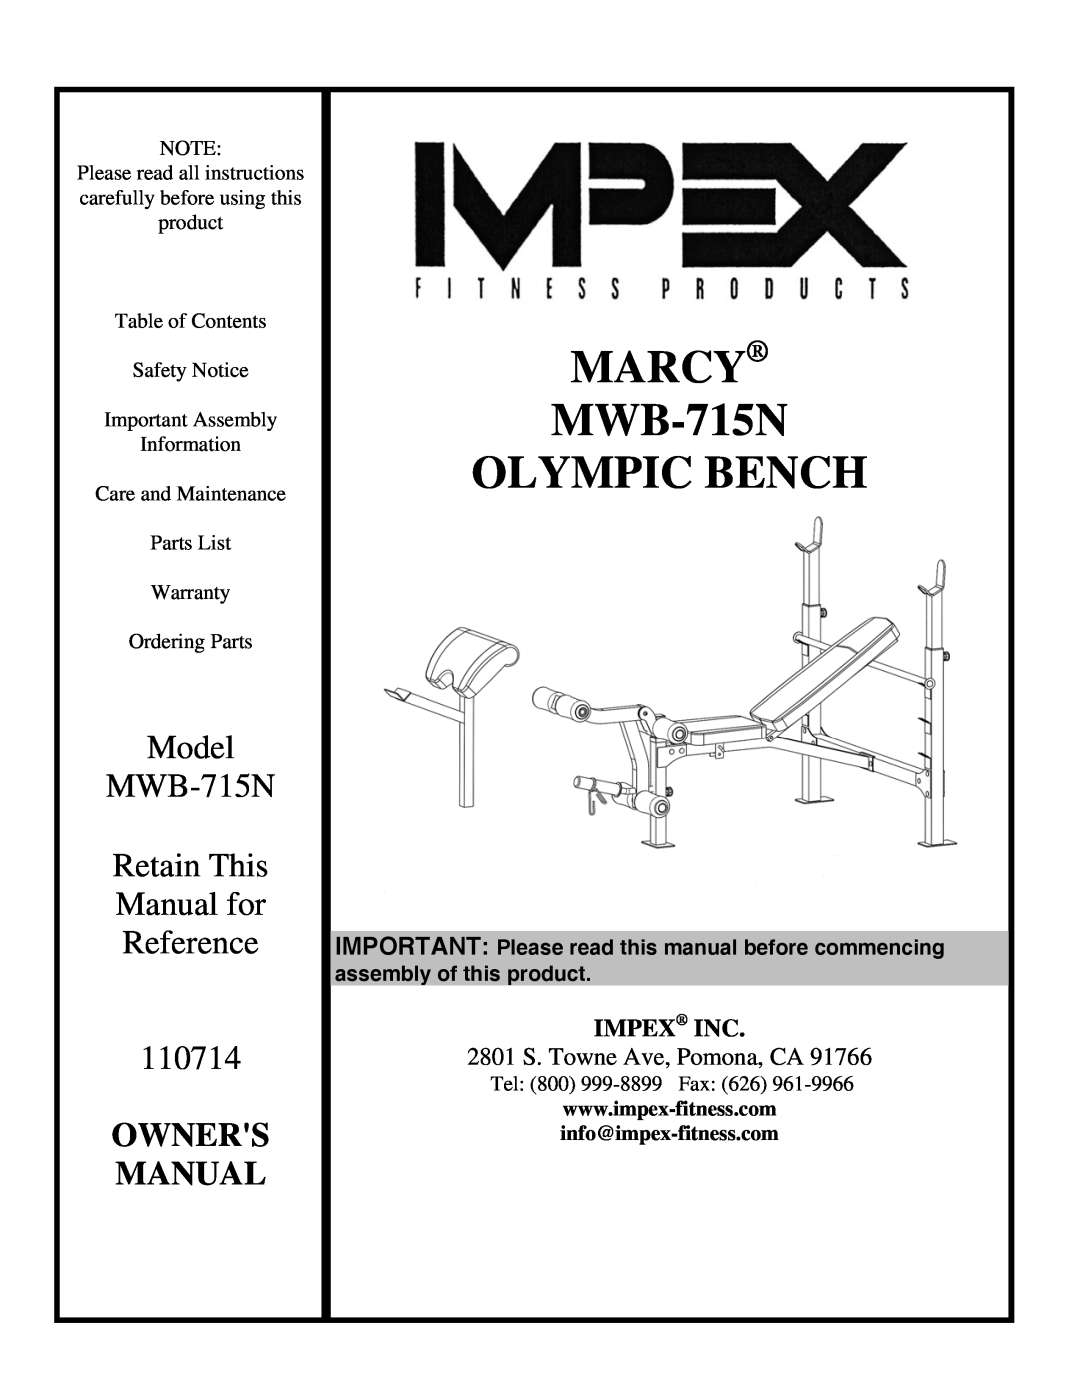 Impex manual MARCY MWB-715N OLYMPIC BENCH, Model MWB-715N Retain This Manual for Reference 110714, Owners Manual 